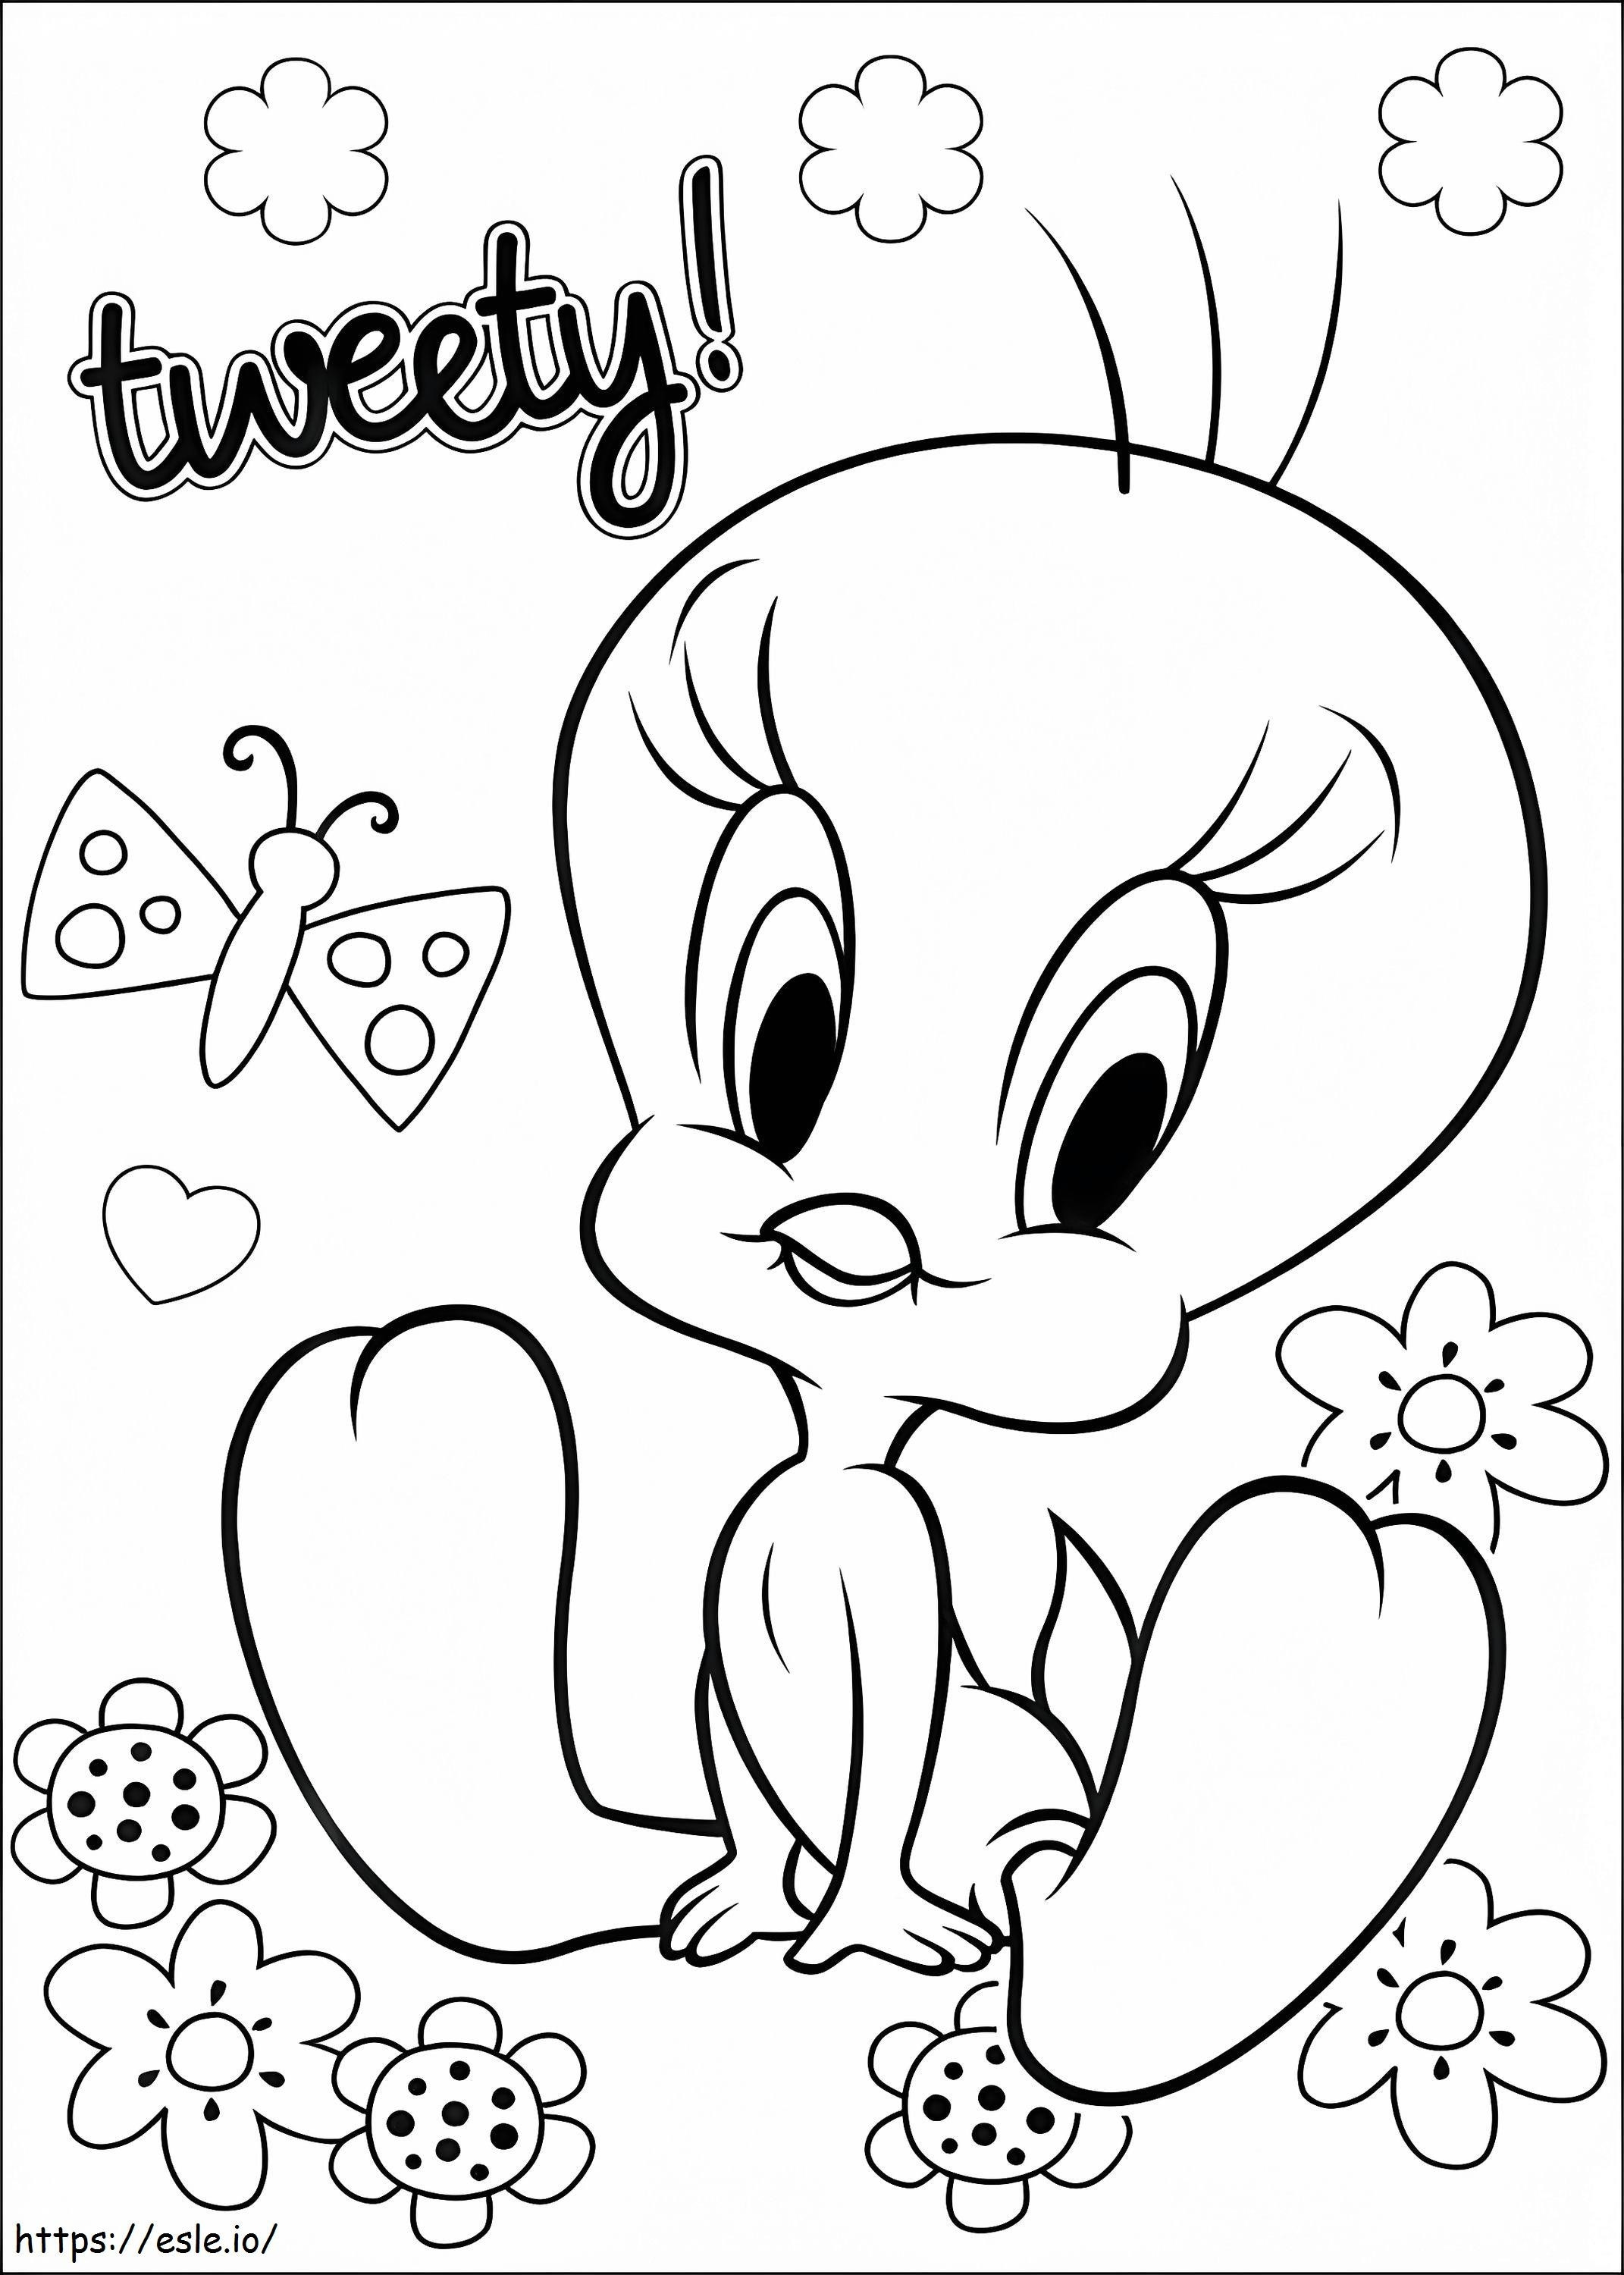 Tweety A4 coloring page